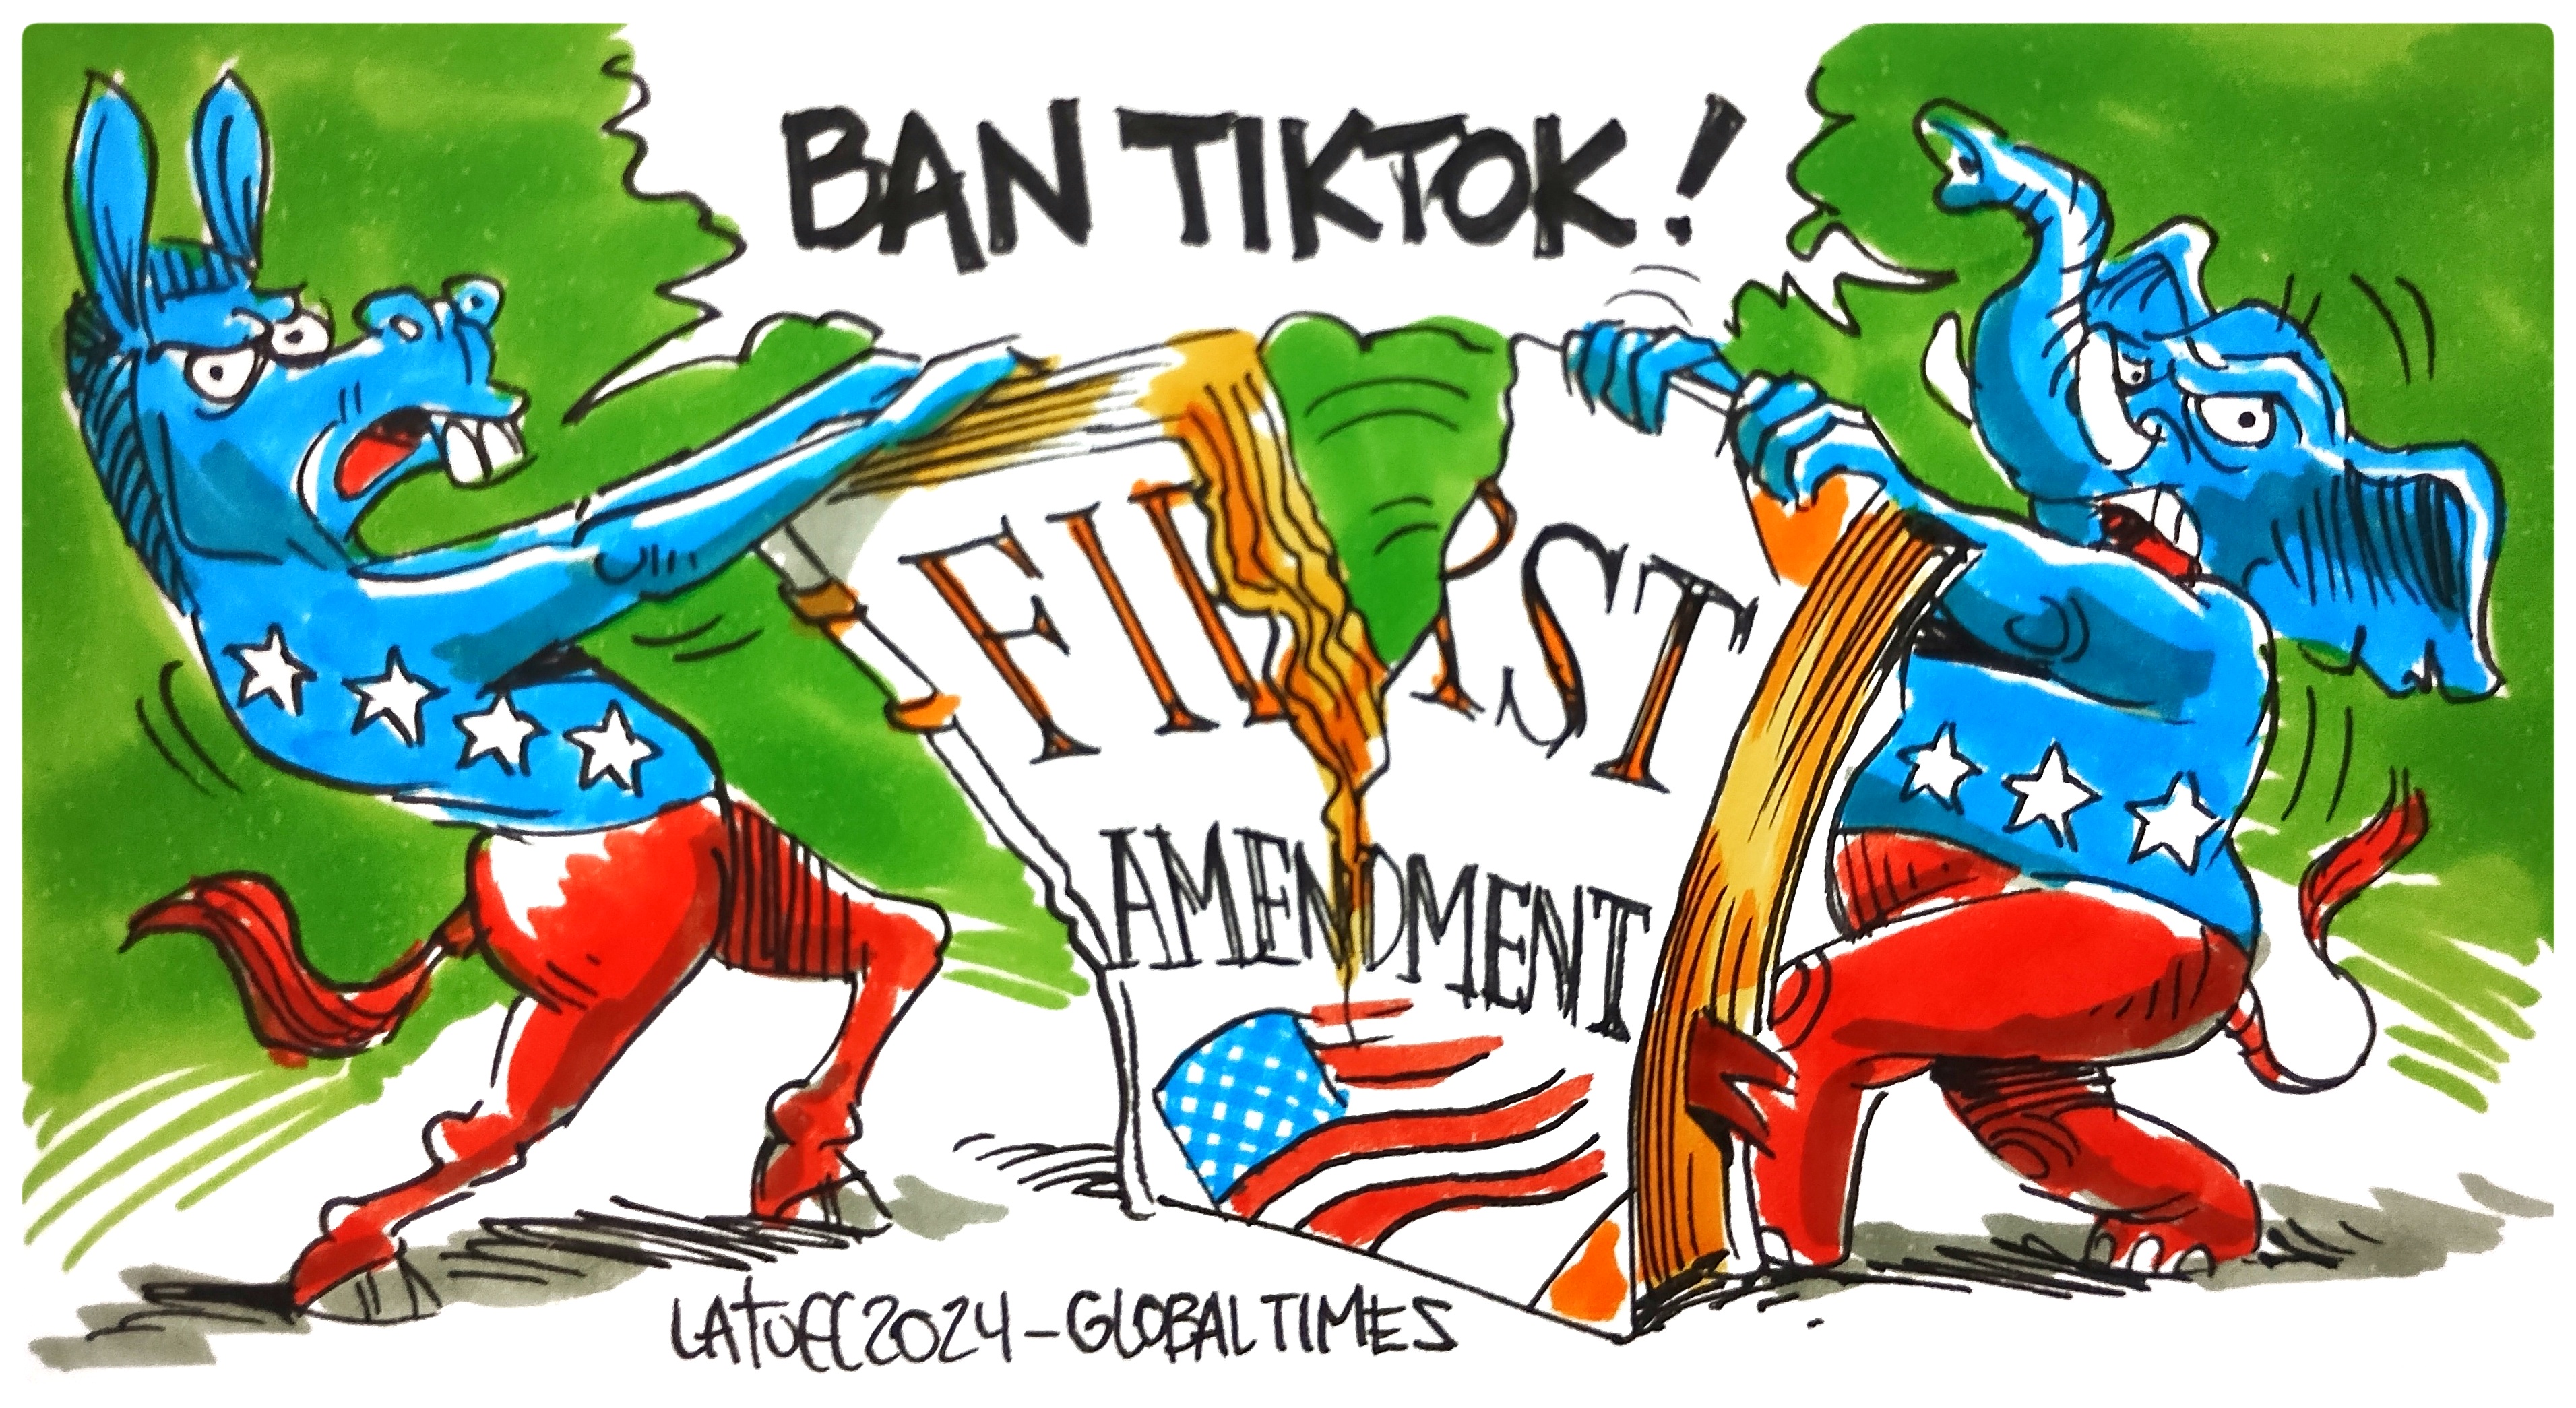 The<strong>tin box of cookies company</strong> US’ crackdown on TikTok tramples upon its First Amendment rights. Cartoon: Carlos Latuff